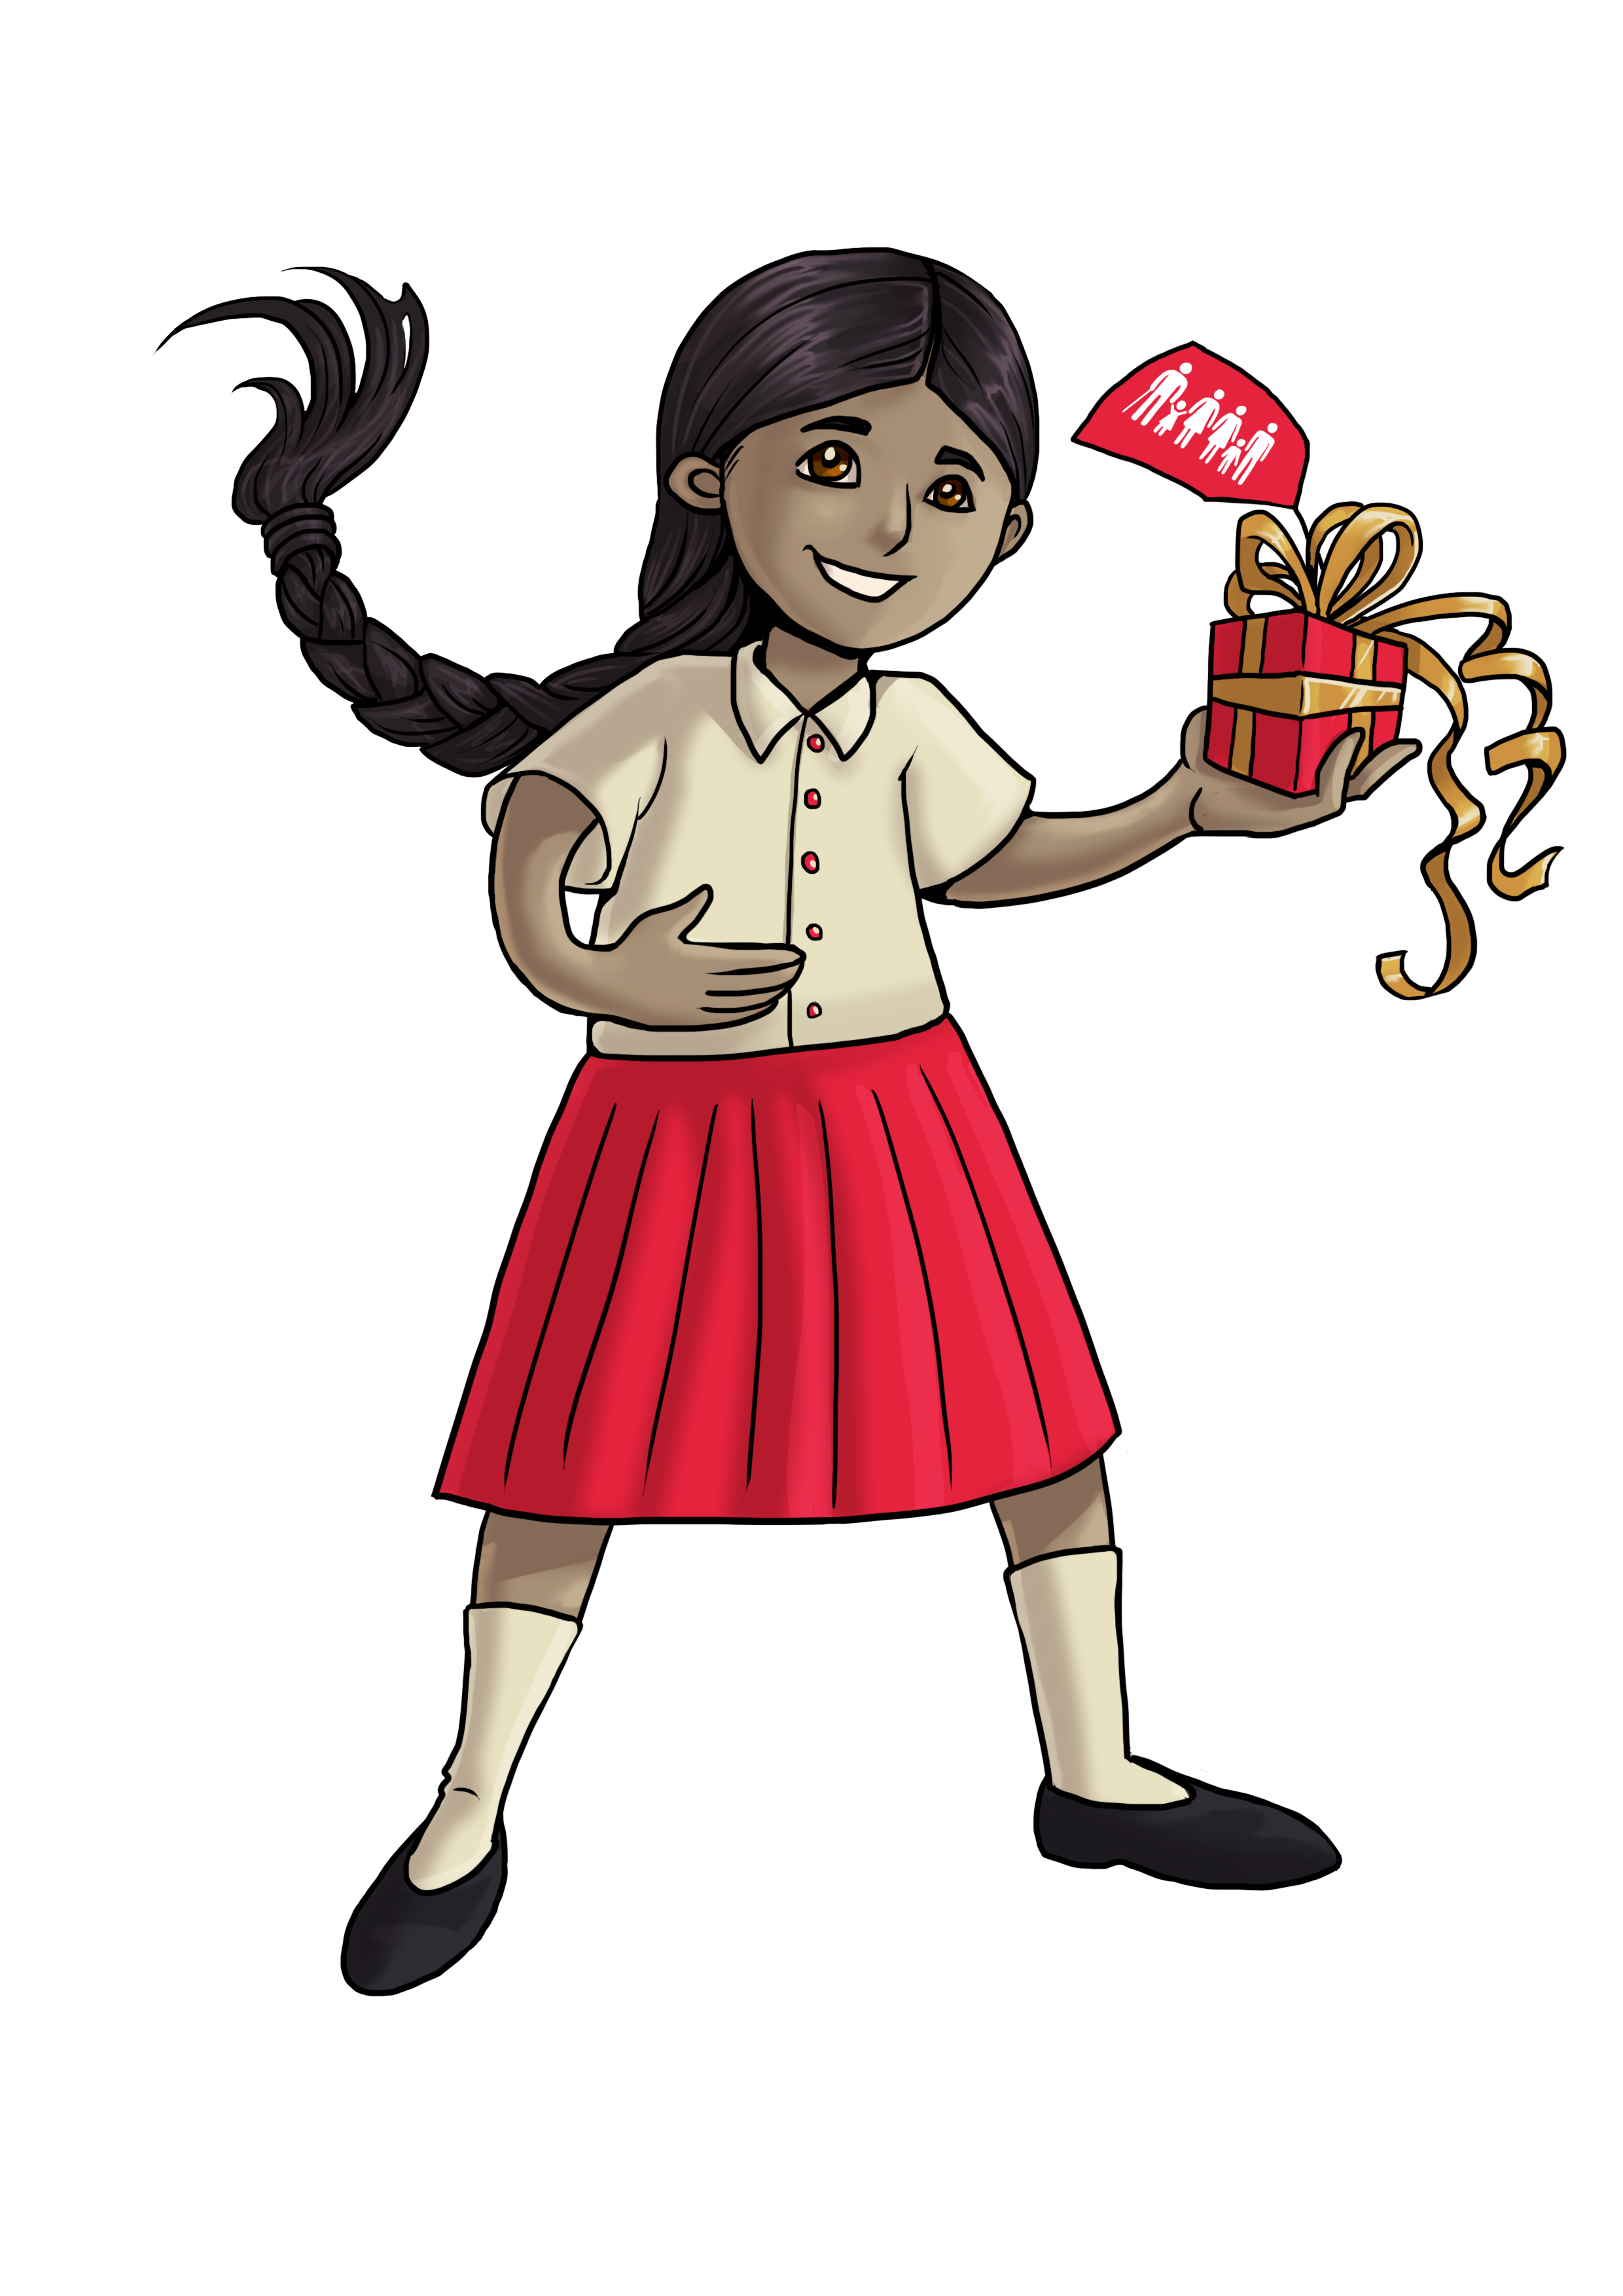 Illustration. A child is holding a gift.